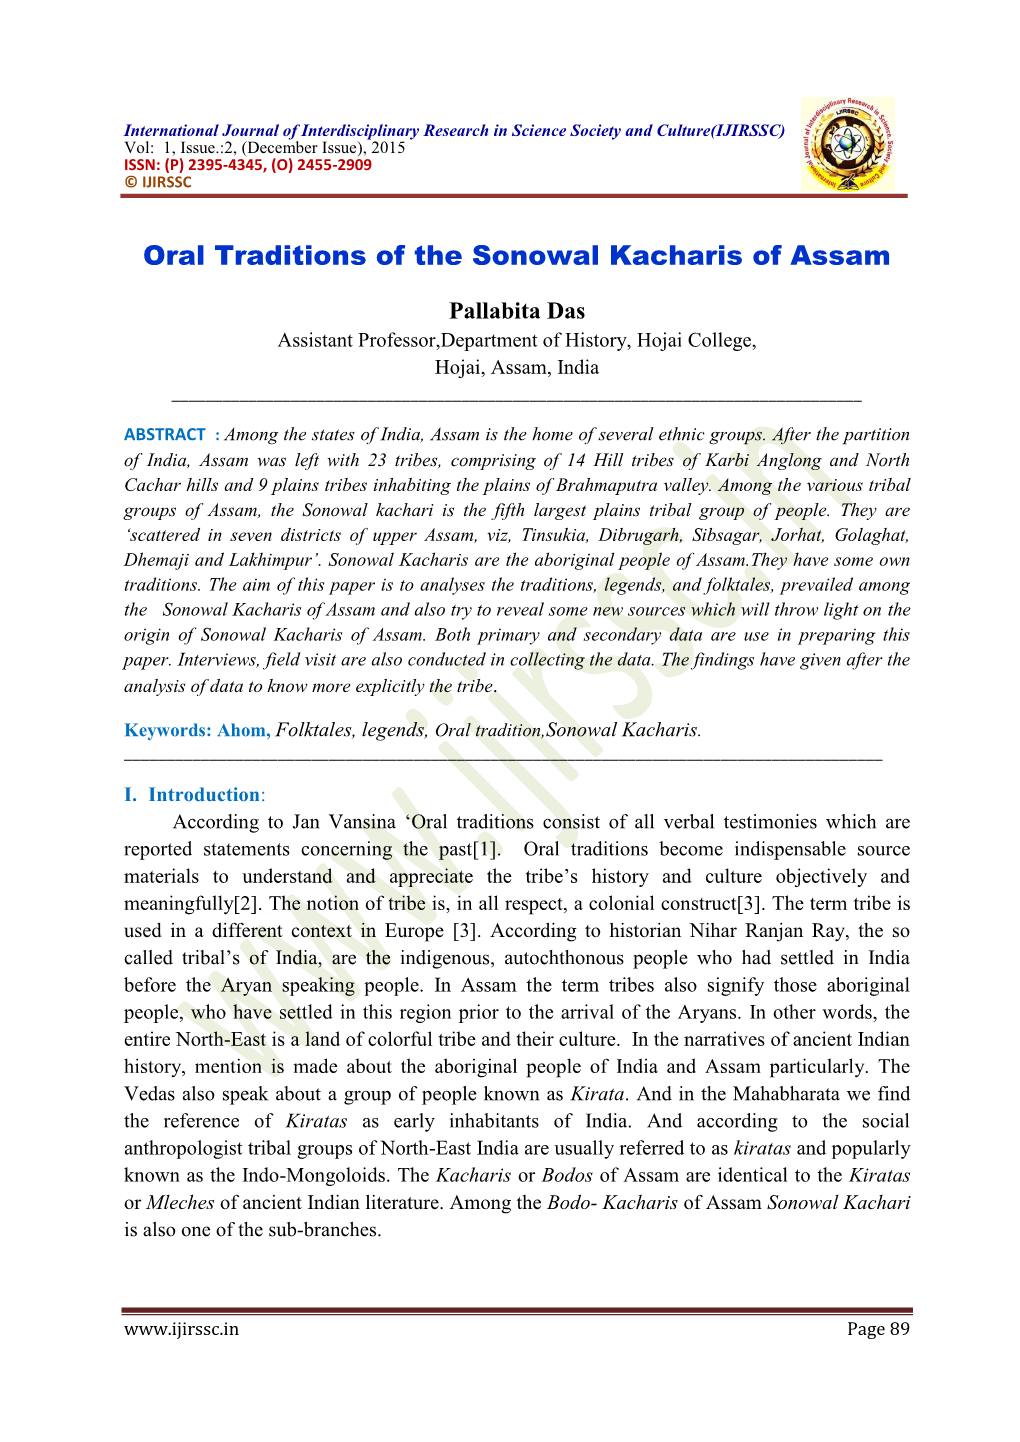 Oral Traditions of the Sonowal Kacharis of Assam